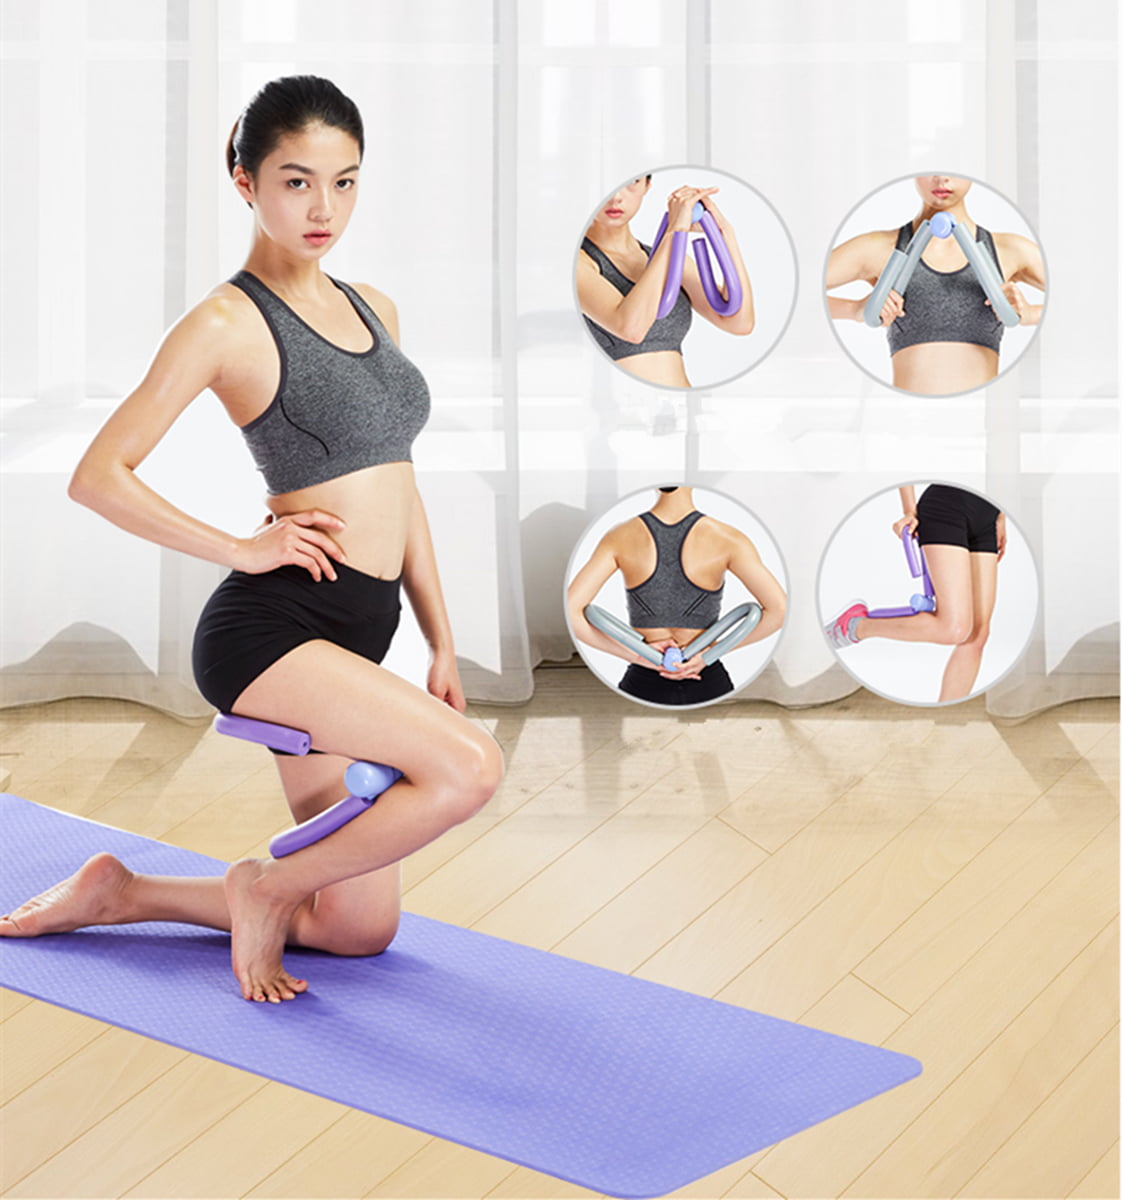 Details about   Thigh Master Leg Muscle Fitness Workout Exercise Multi-function Gym Equipment E0 